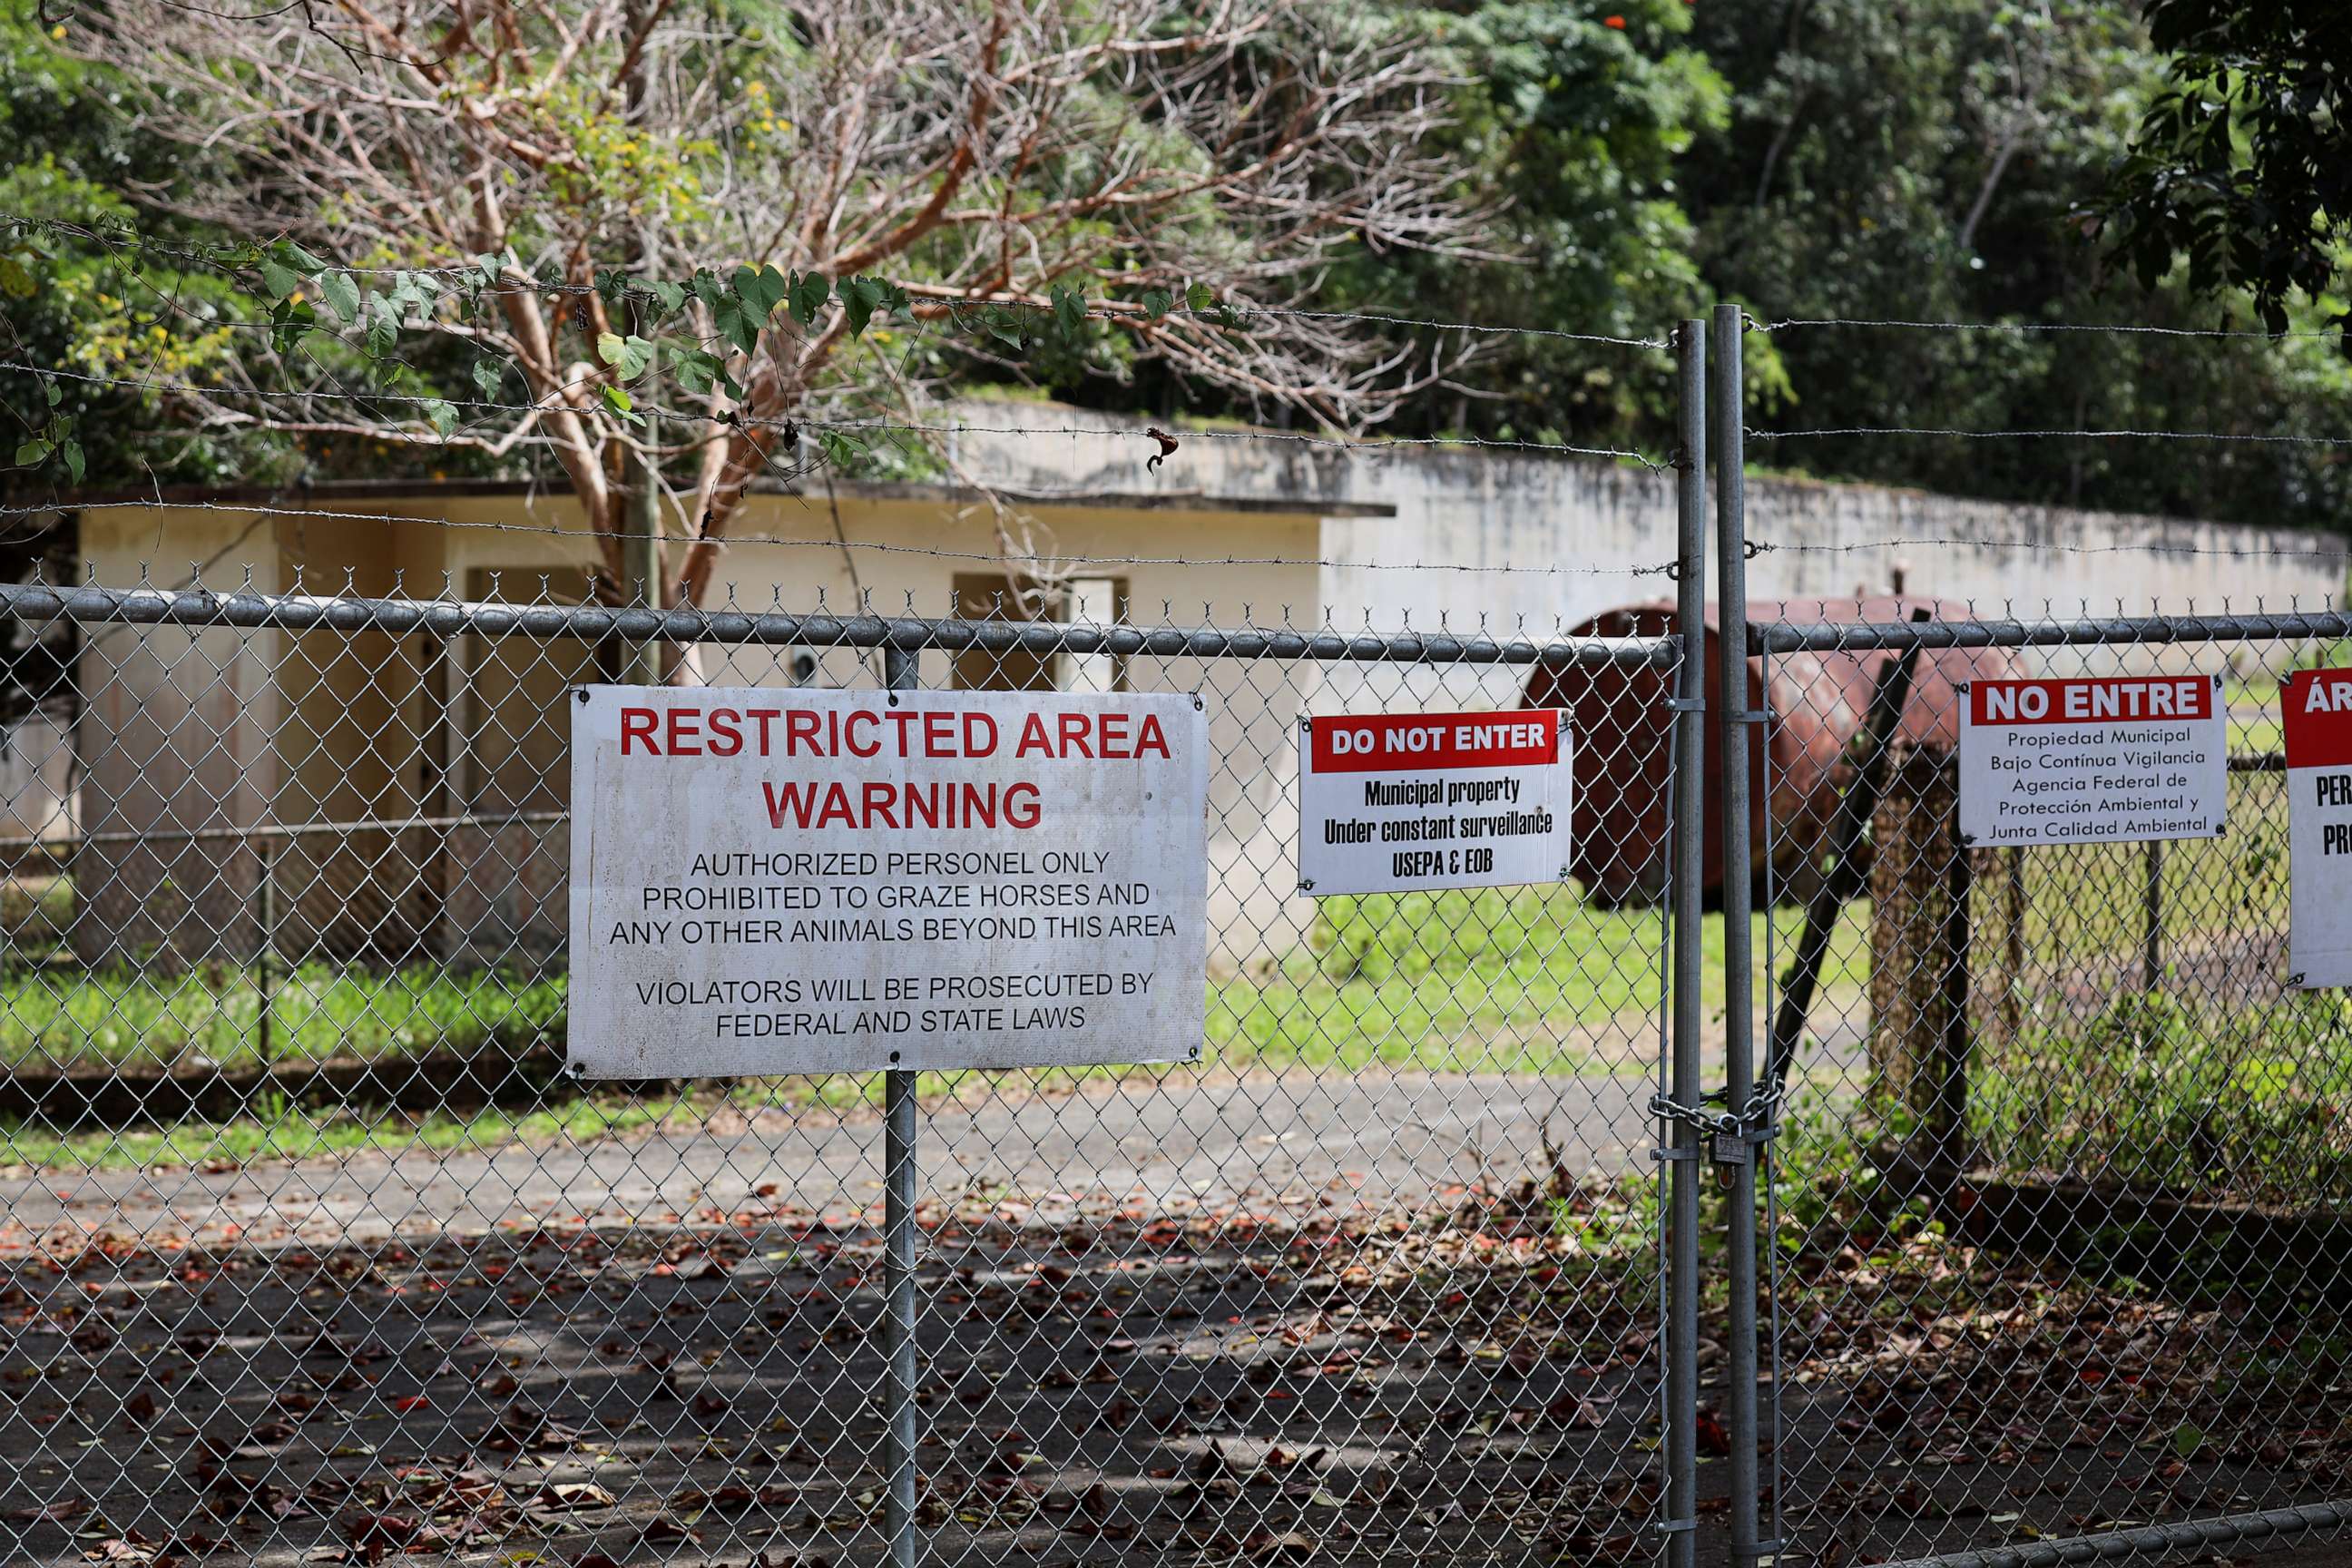 PHOTO: Warning signs are displayed on the fence surrounding the inactive Barceloneta Landfill site in Puerto Rico. About 300 tons of hazardous wastes are located in sinkholes on the property.